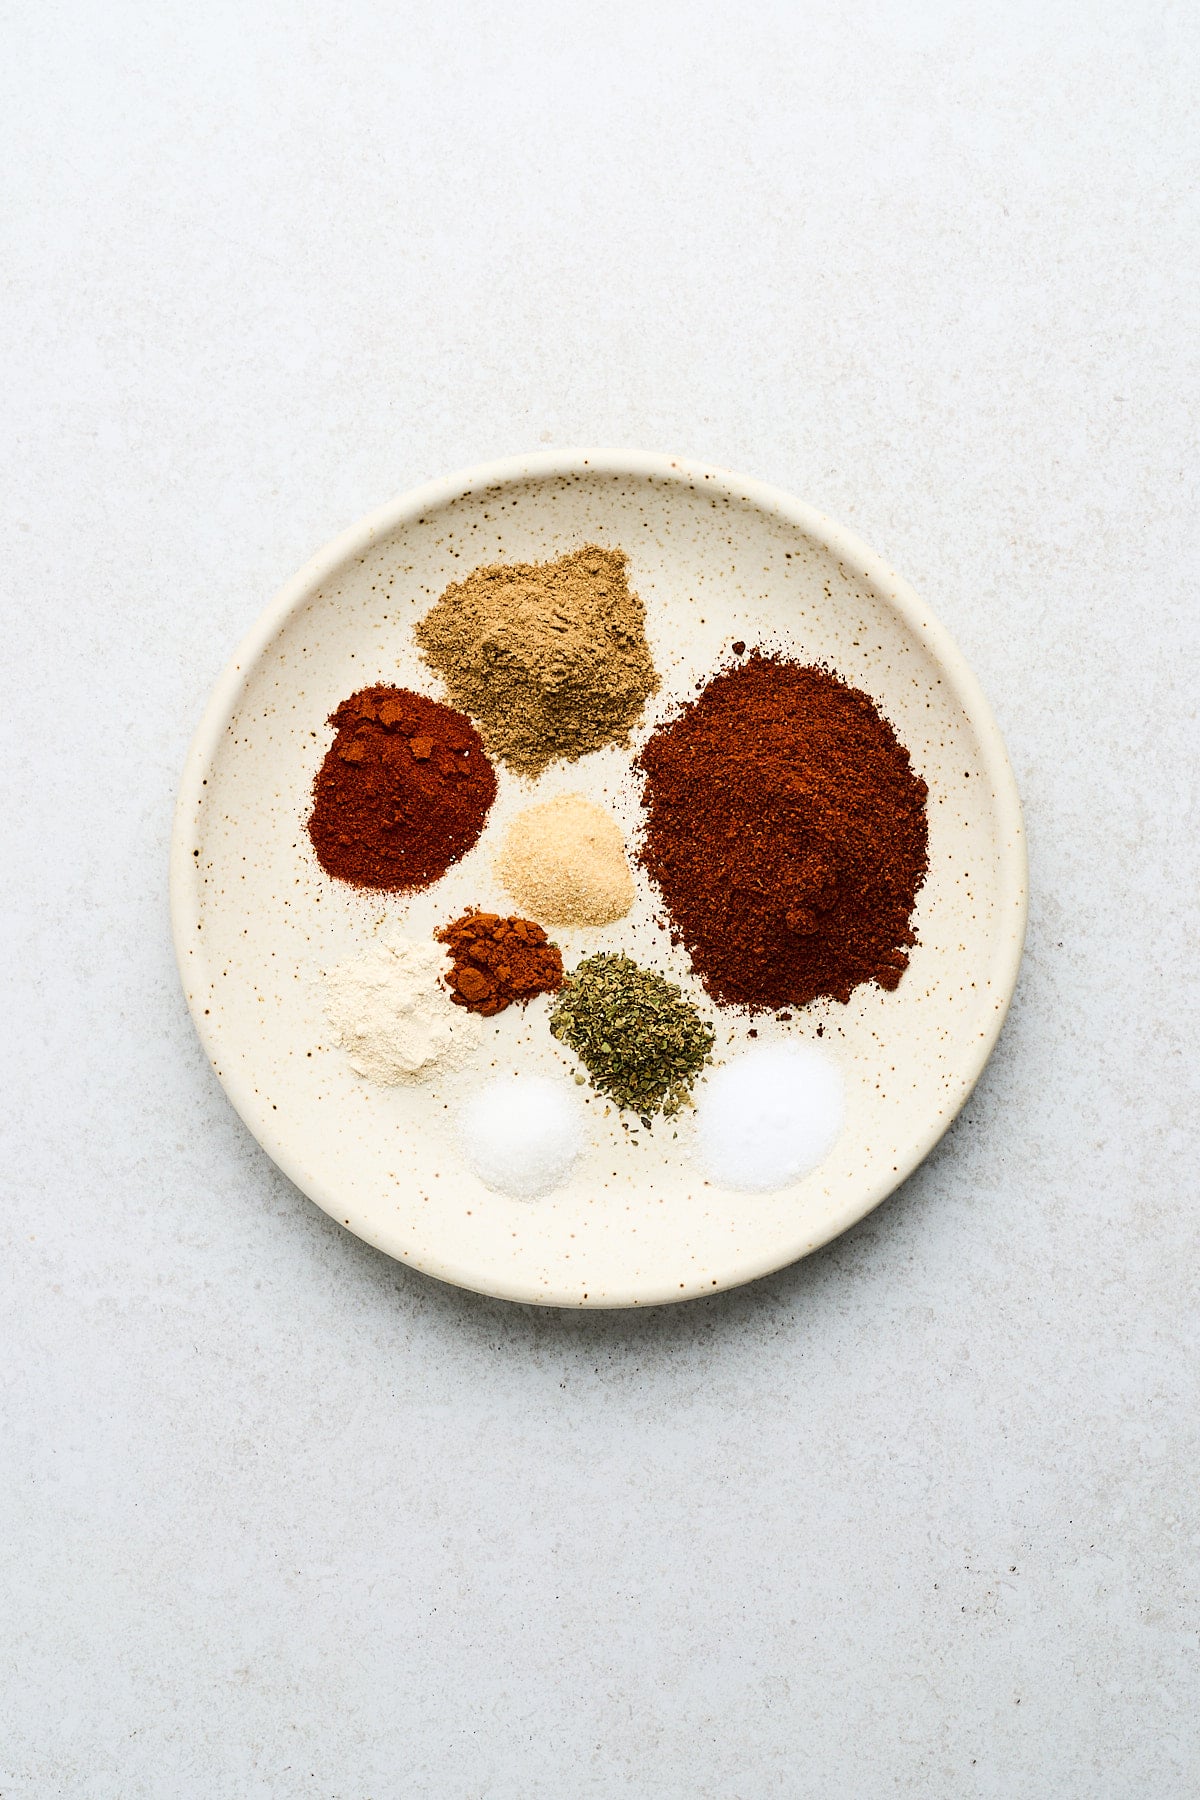 Herbs and spices on a plate.